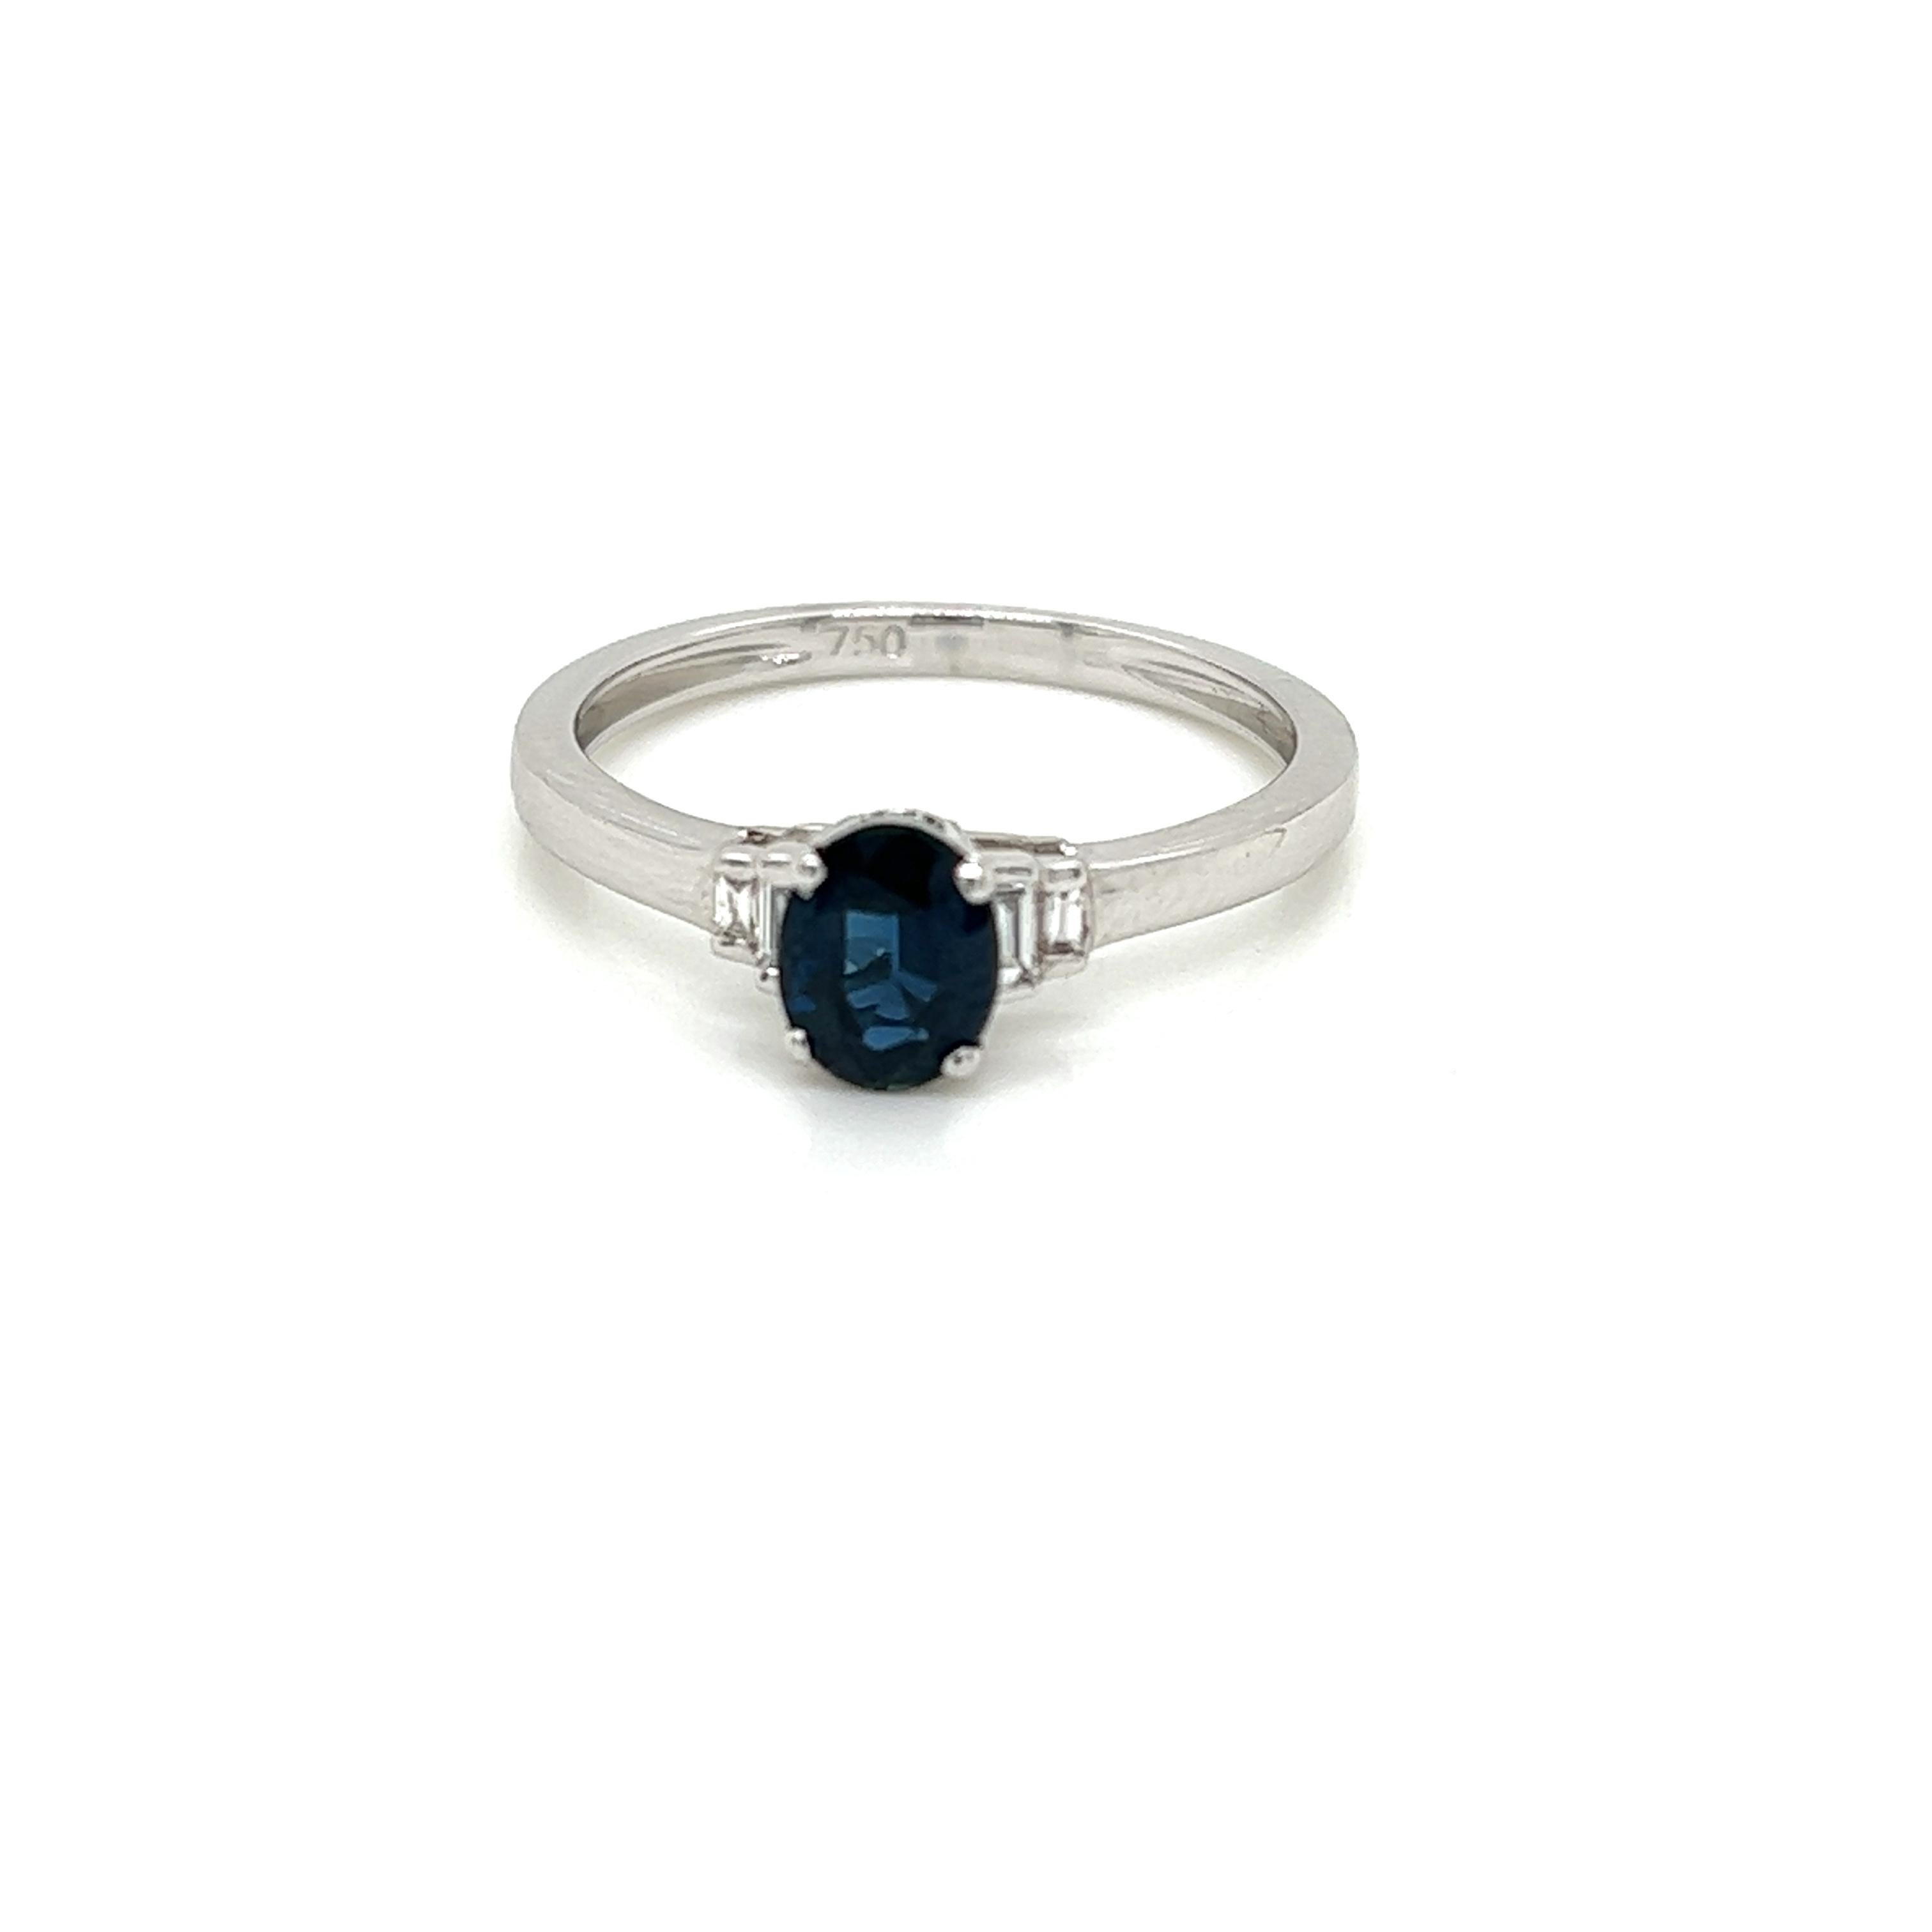 This timeless ring features a resplendent 0.79 carat oval Blue Sapphire held in a claw setting at its centre. On either side of it are two baguette cut Diamonds, weighing 0.07 carats in total and set in 18K White Gold.

This alluring ring is